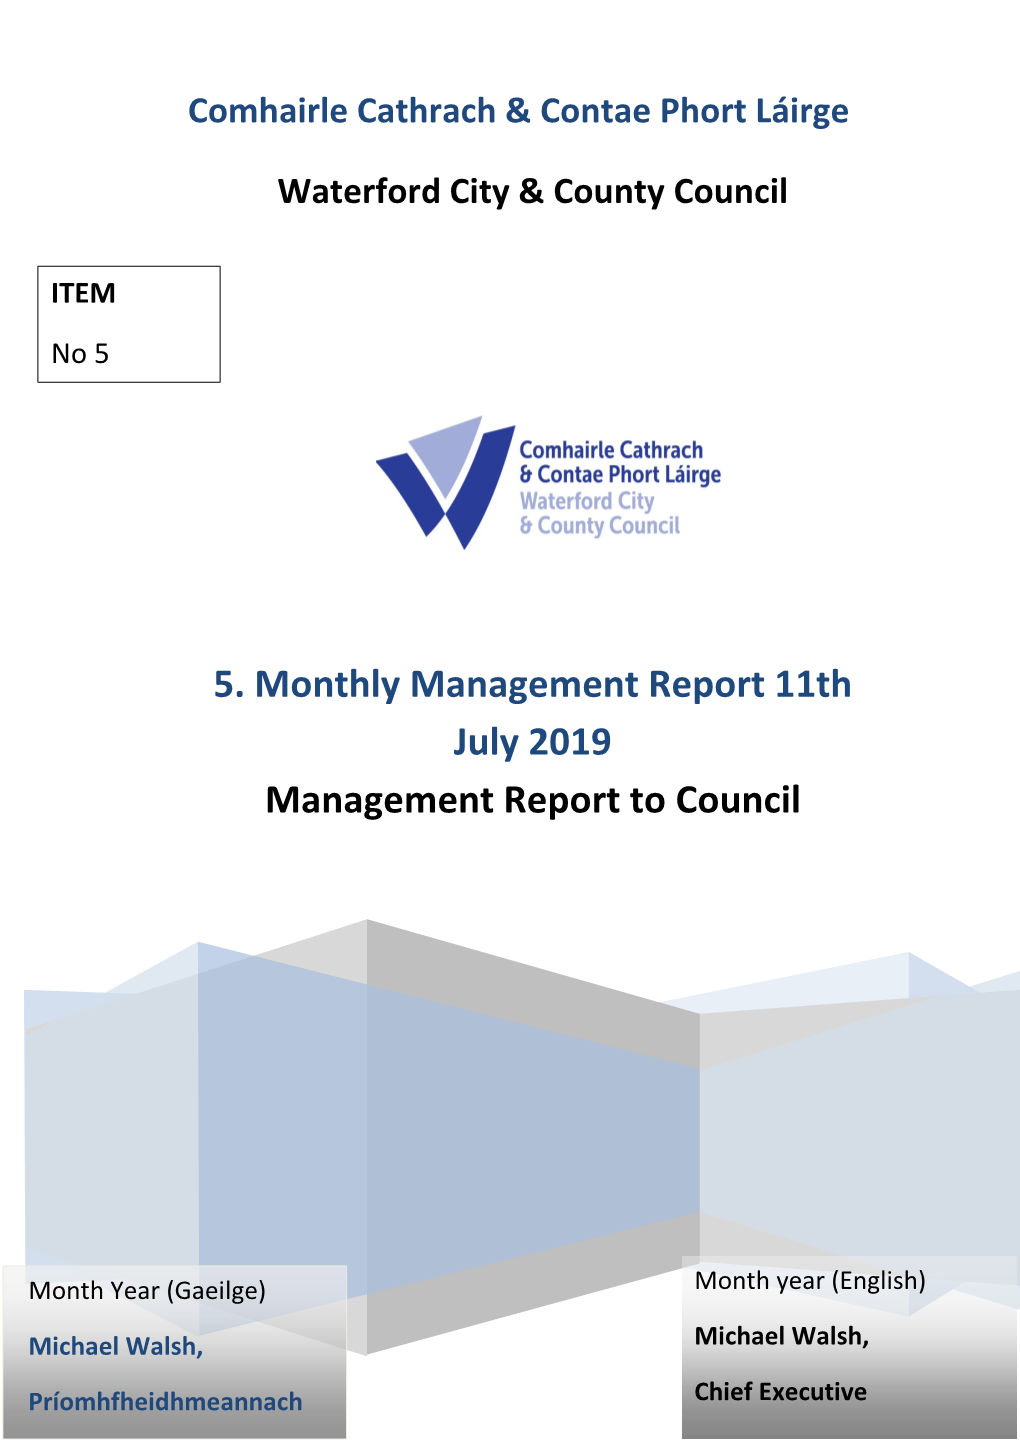 5. Monthly Management Report 11Th July 2019 Management Report to Council